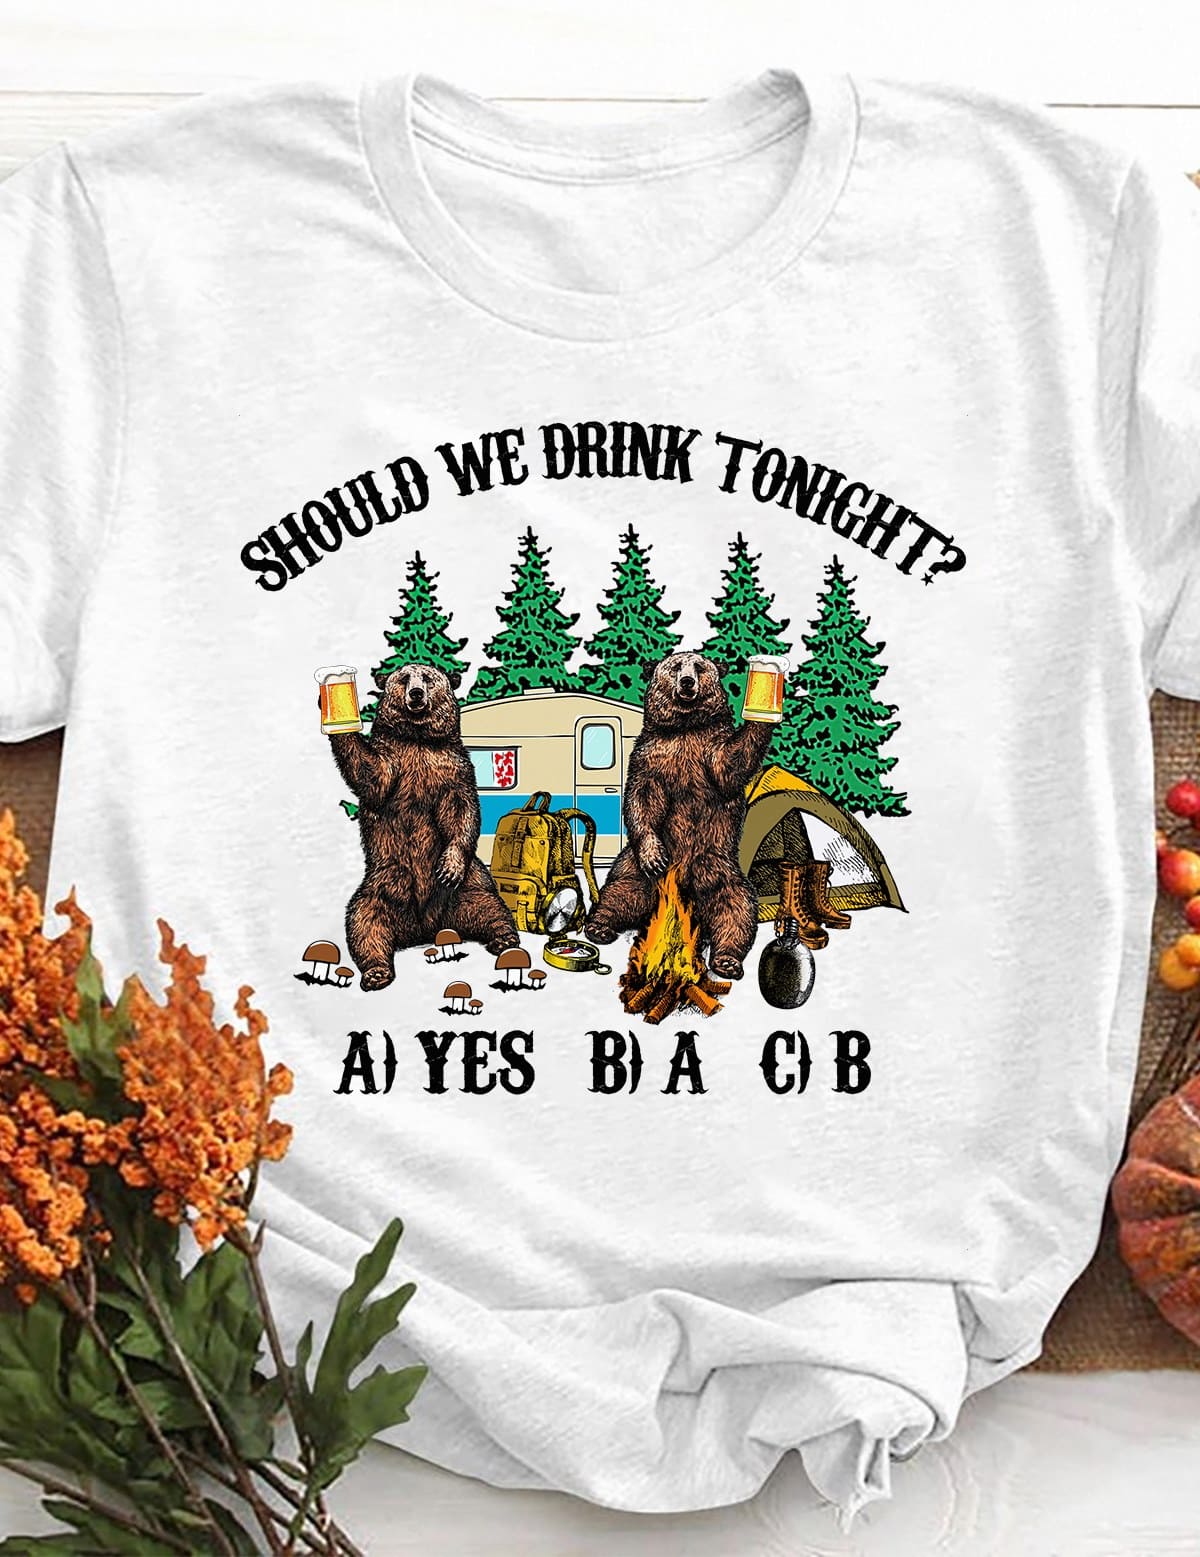 Should we drink tonight - Camping partner T-shirt, bear drinking beer, drinking beer and camping